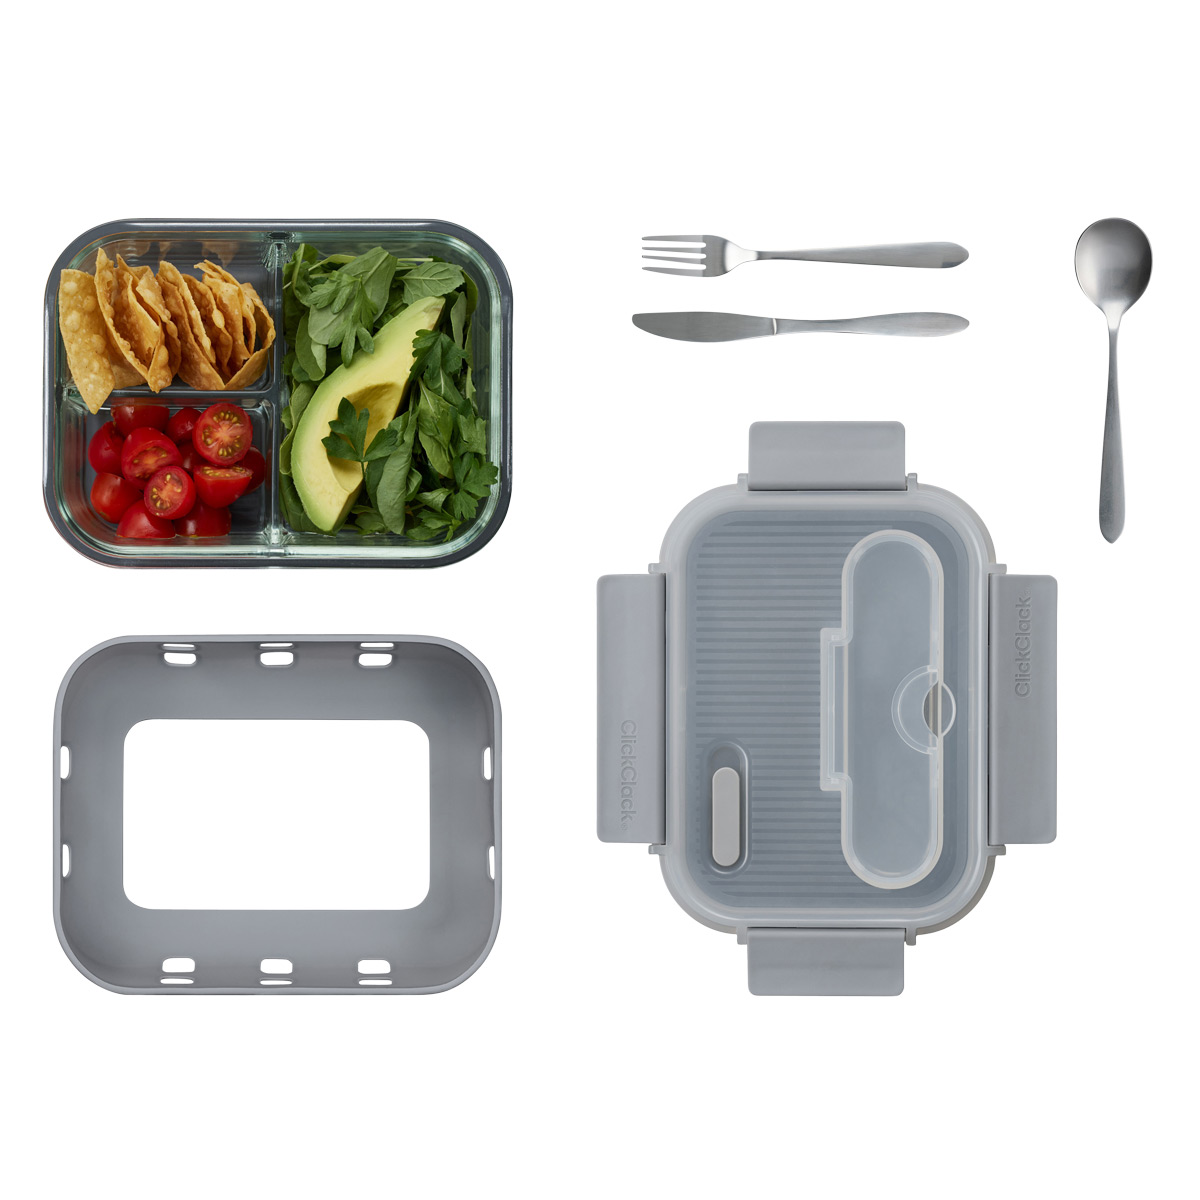 https://www.containerstore.com/catalogimages/420895/10084607-DAILY-BENTO-BOP-Click-Clack.jpg